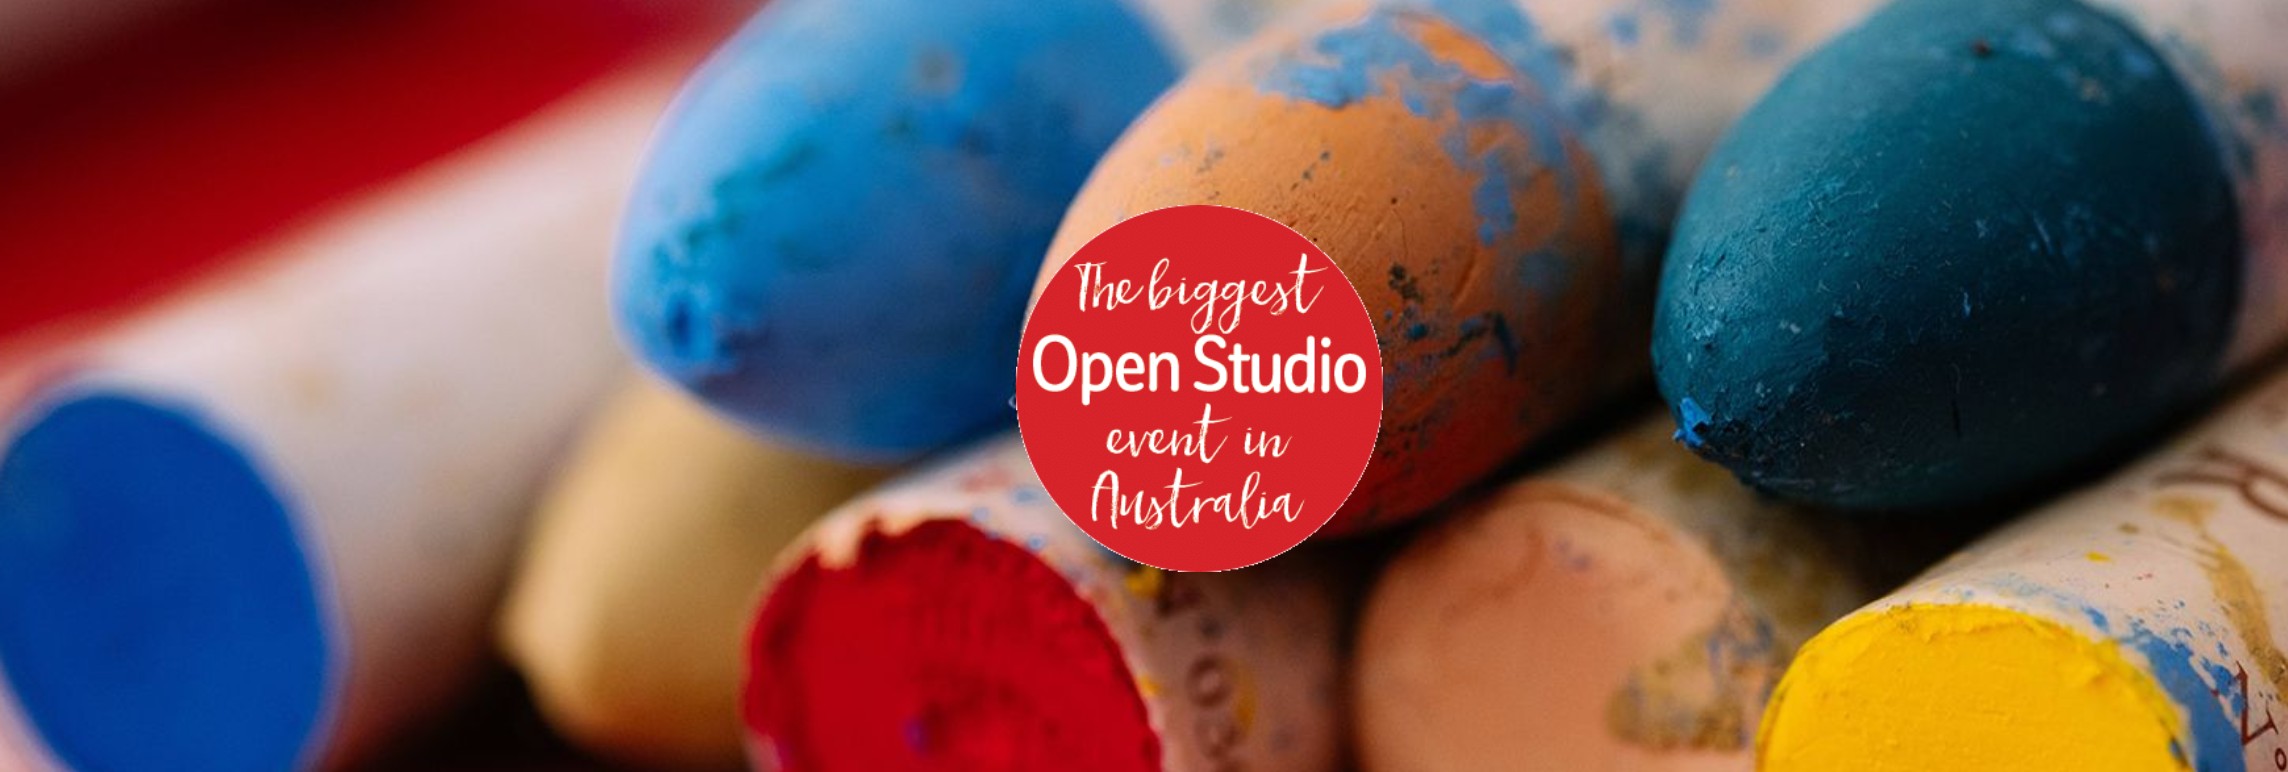 Margaret River Region Open Studio event attracts record number of artists